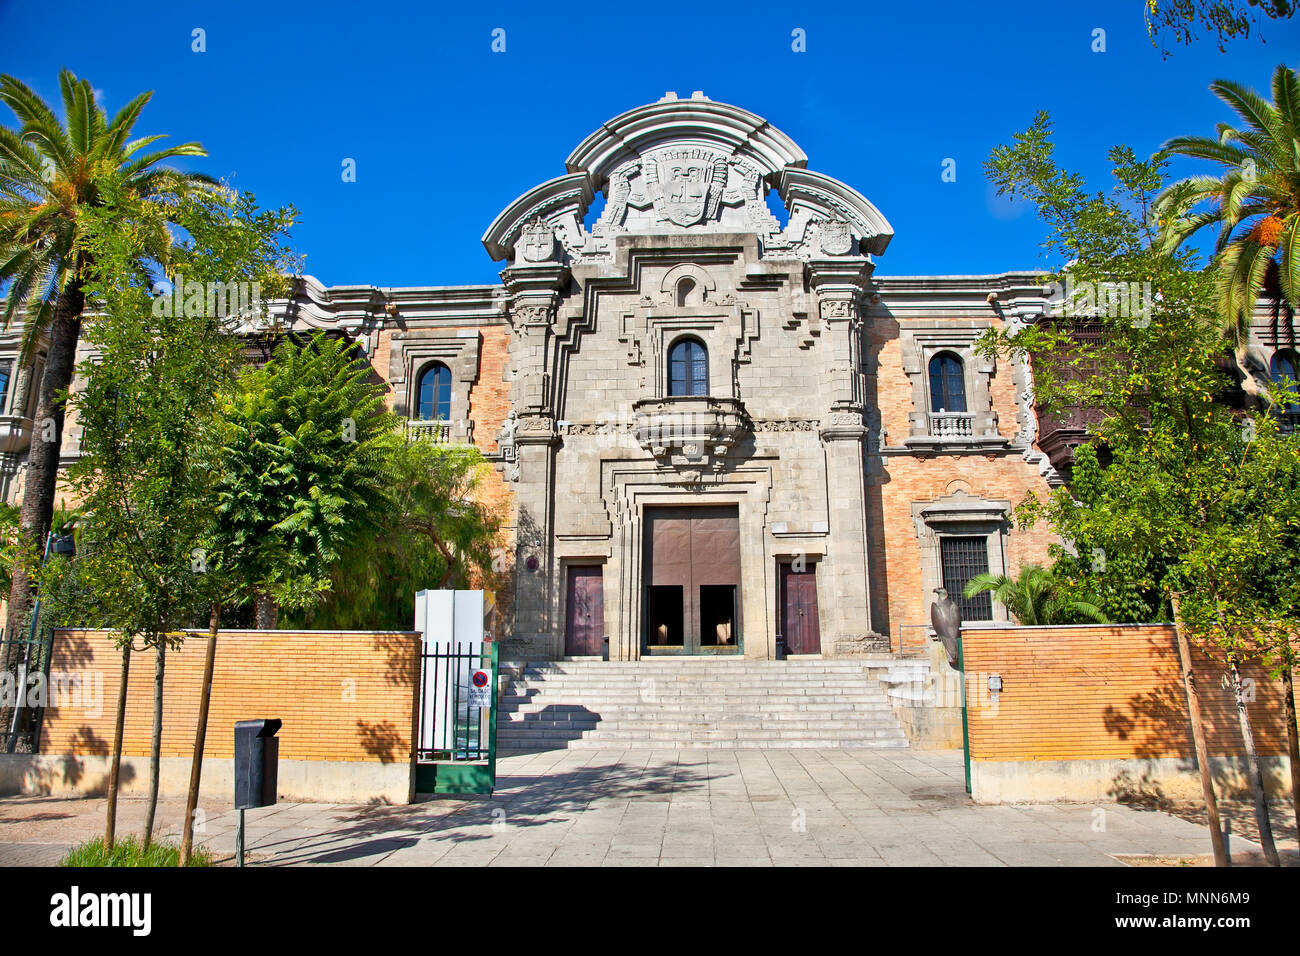 Casa de la Ciencia in Sevilla. Spain. Centre of National Research Council (CSIC) aimed for bringing science to society. Stock Photo